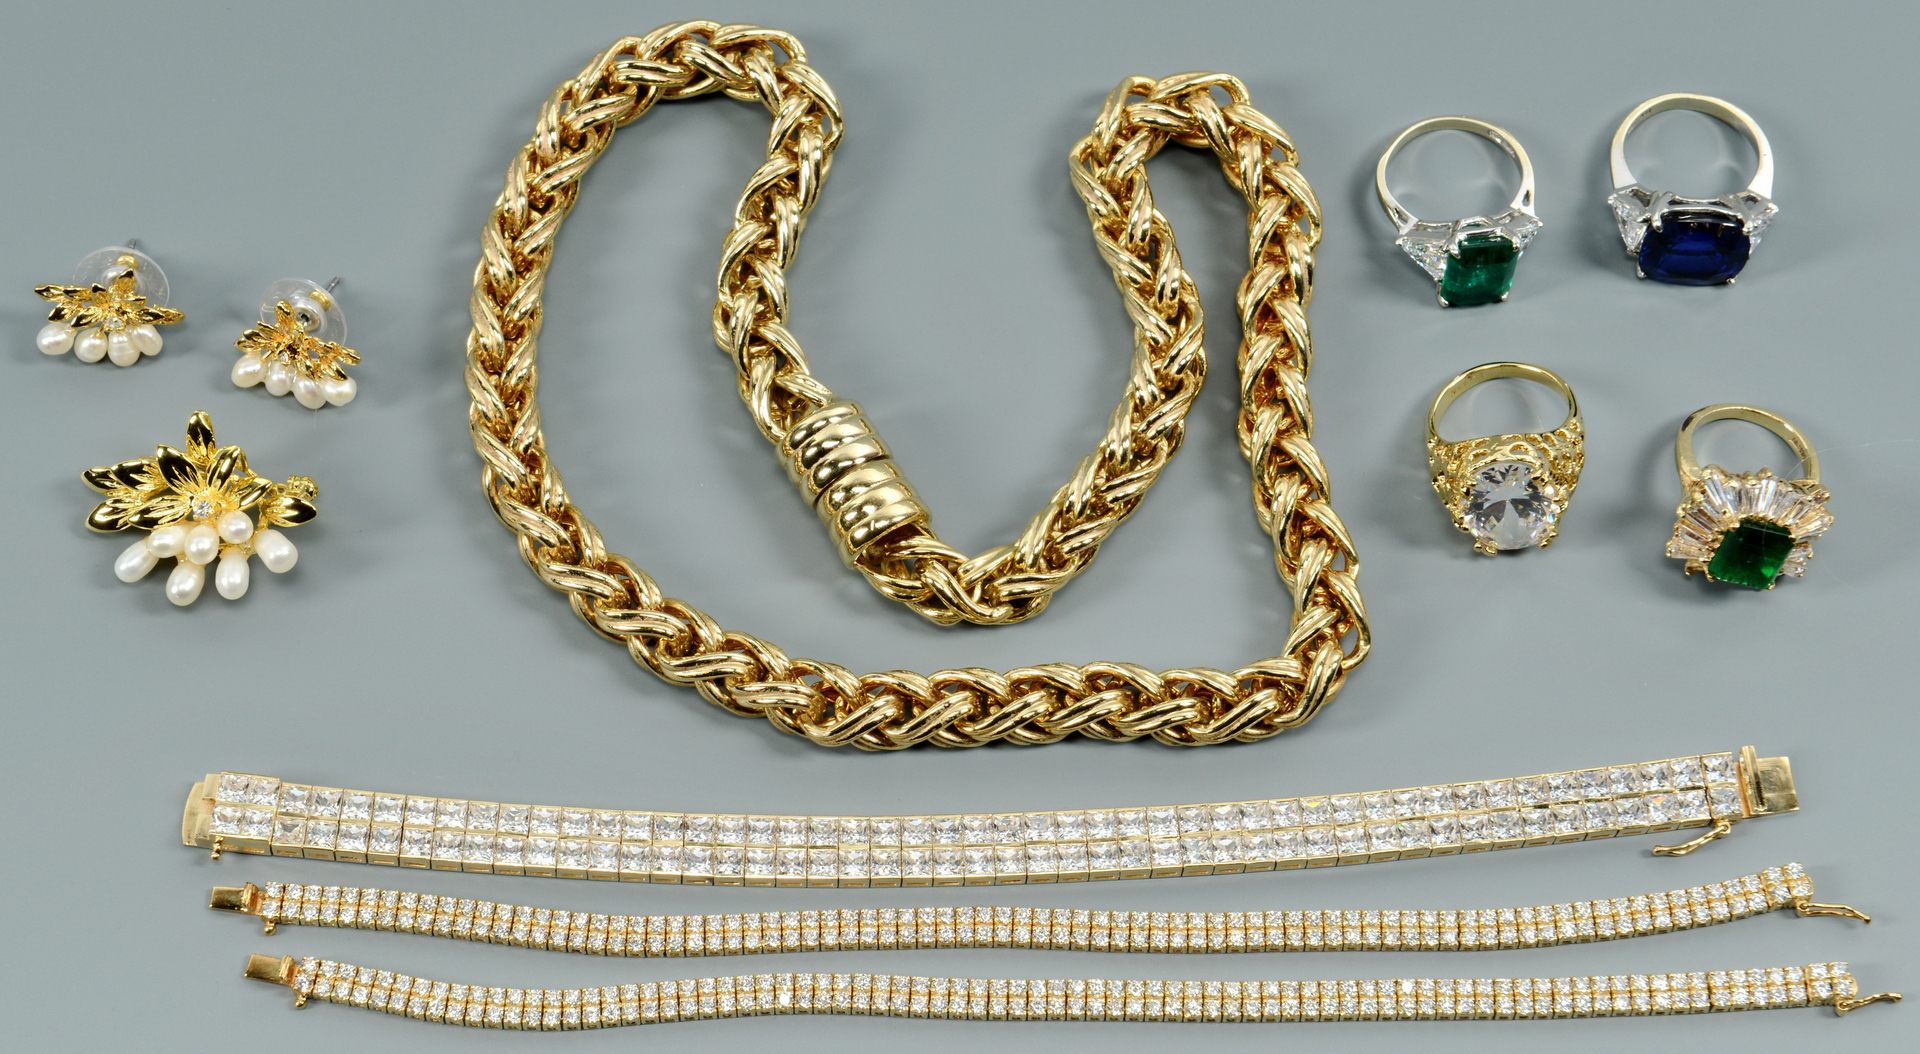 Lot 3088062: Travel Jewelry incl 14k with Synthetic Stones